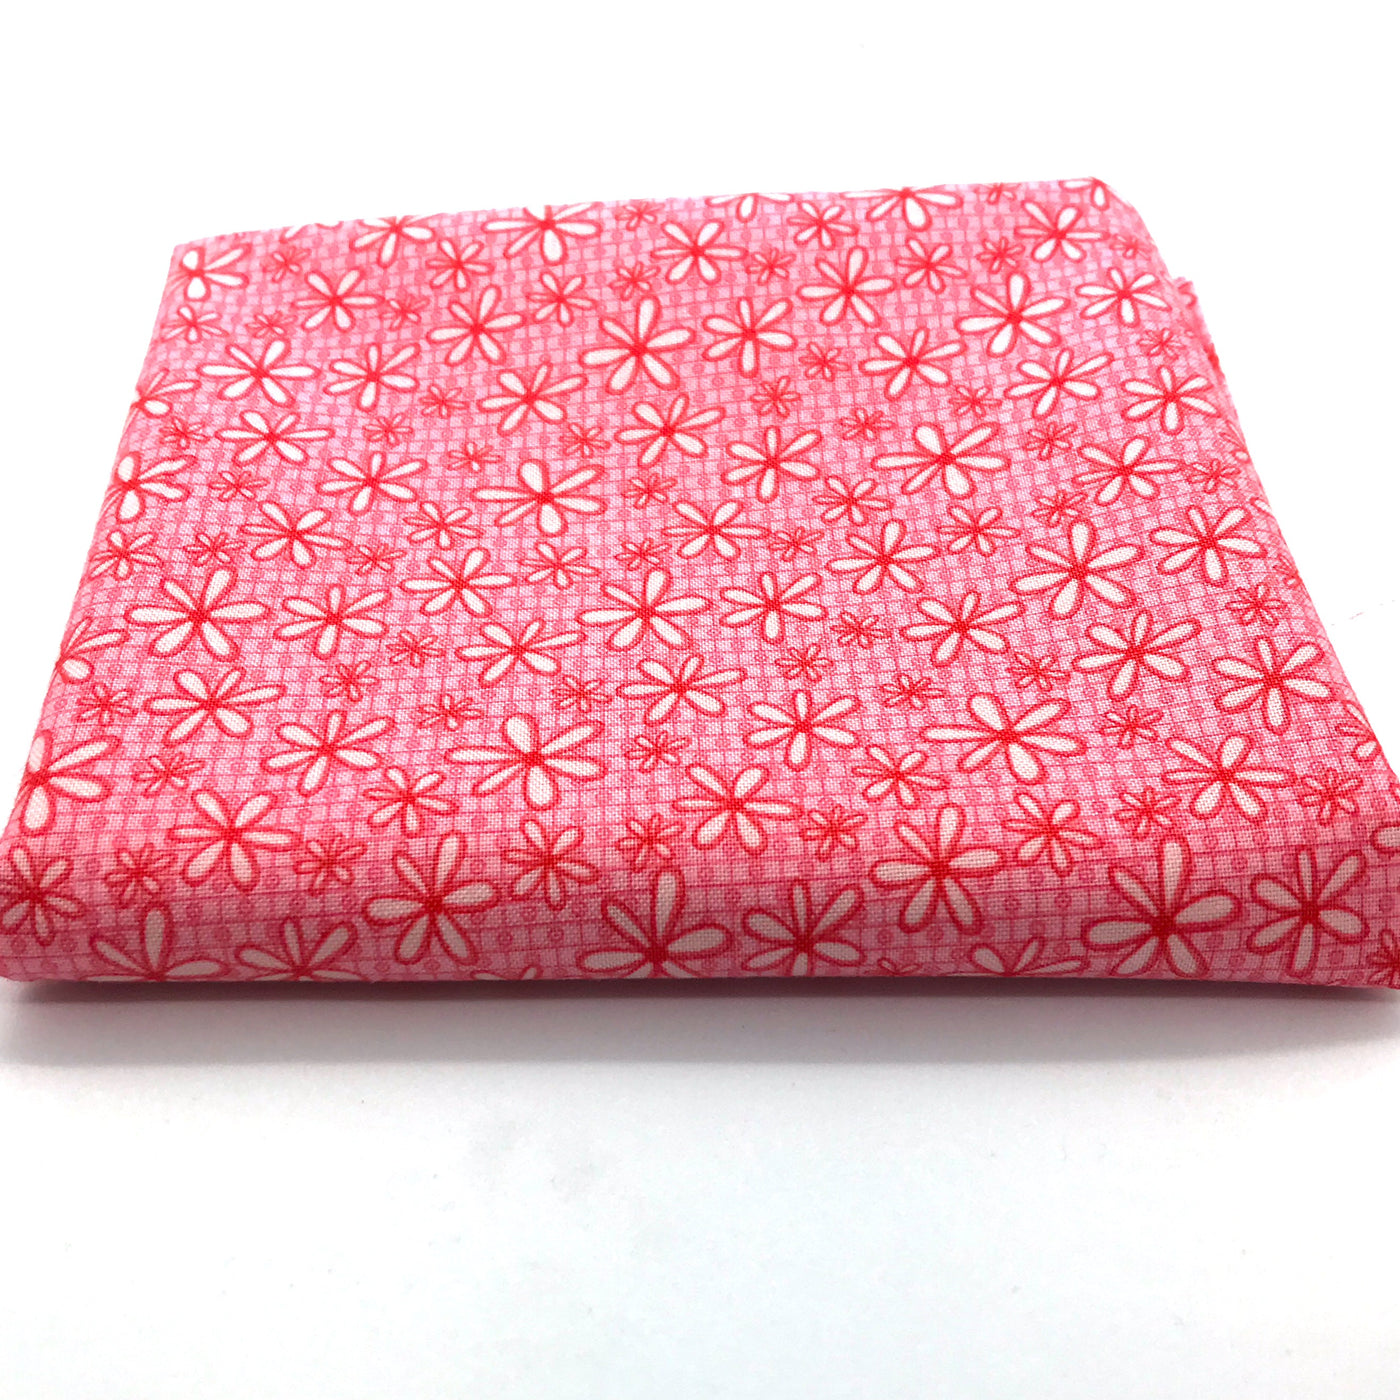 Pink daisy pattern from the basically hugs collection by Red Rooster